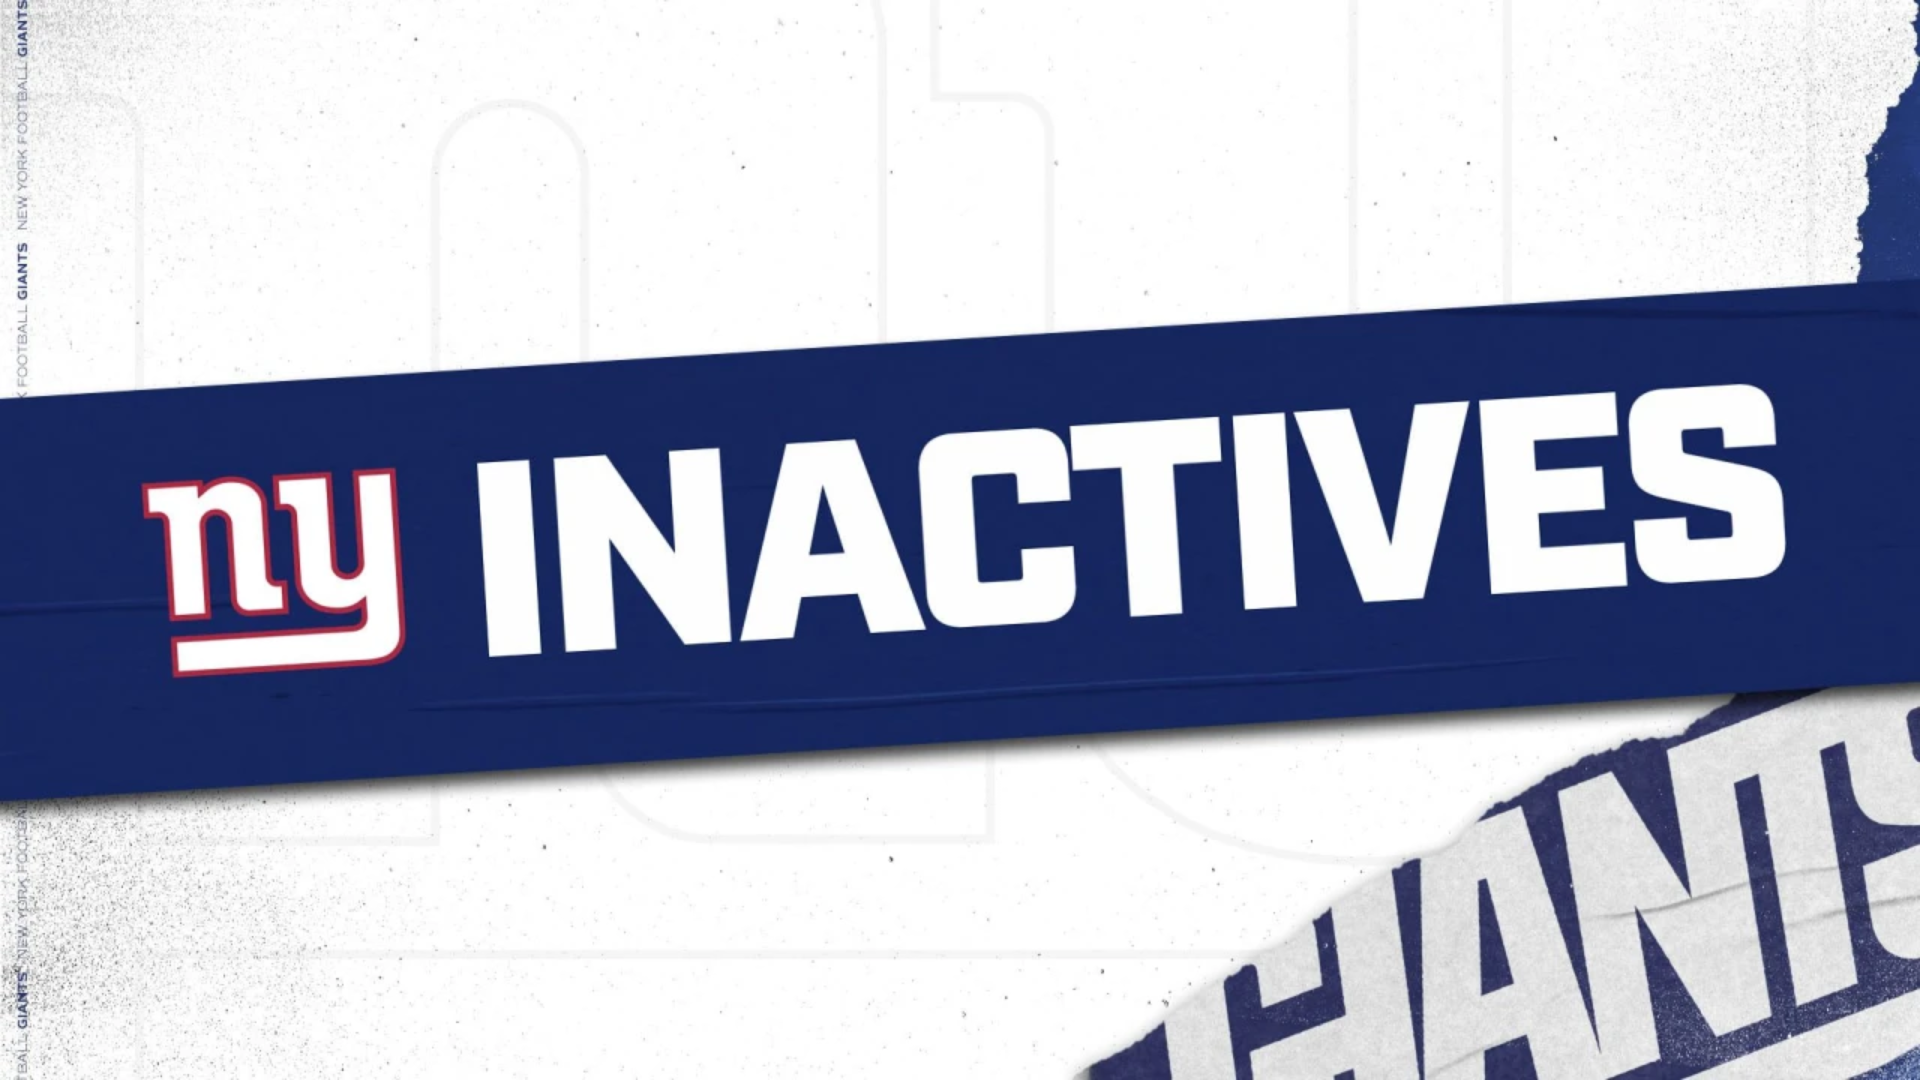 Inactives